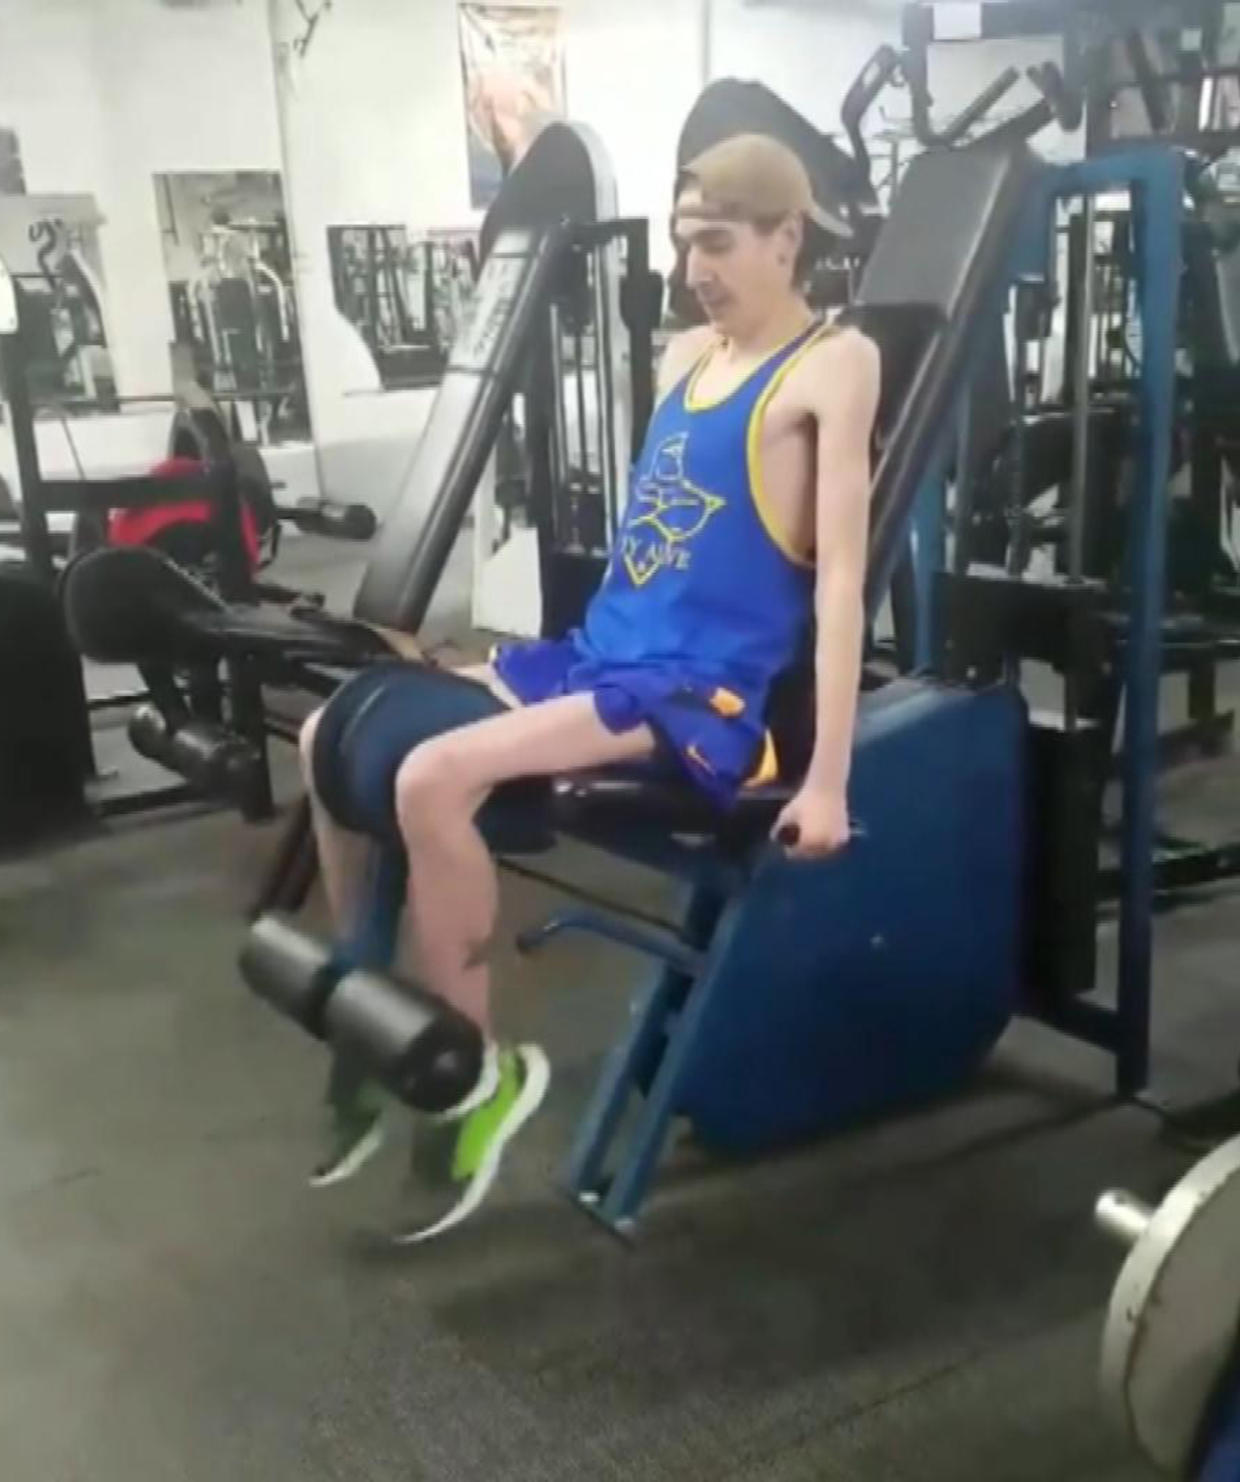 Bodybuilder With Cystic Fibrosis Uses Lifting to Inspire Others CBS